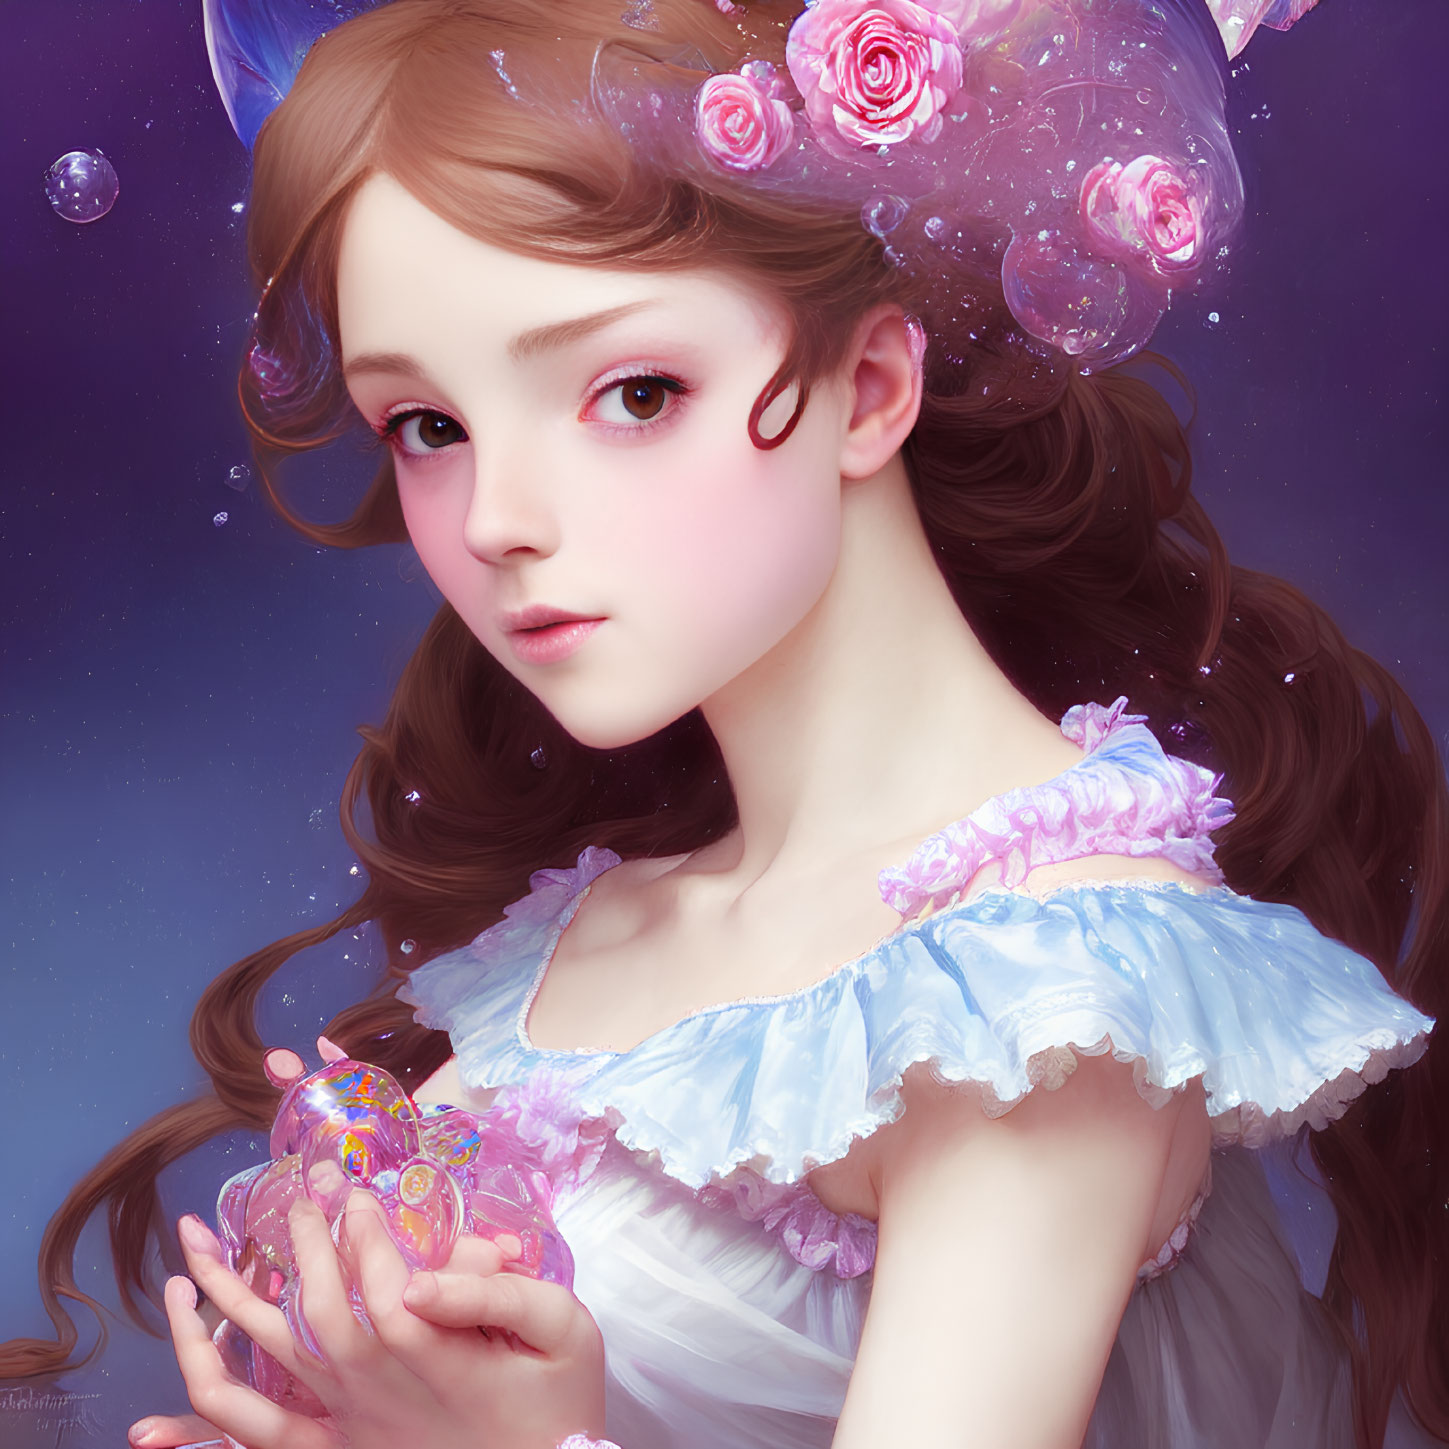 Illustration: Young Woman with Roses, Ethereal Bubbles, Glowing Heart, Purple Background